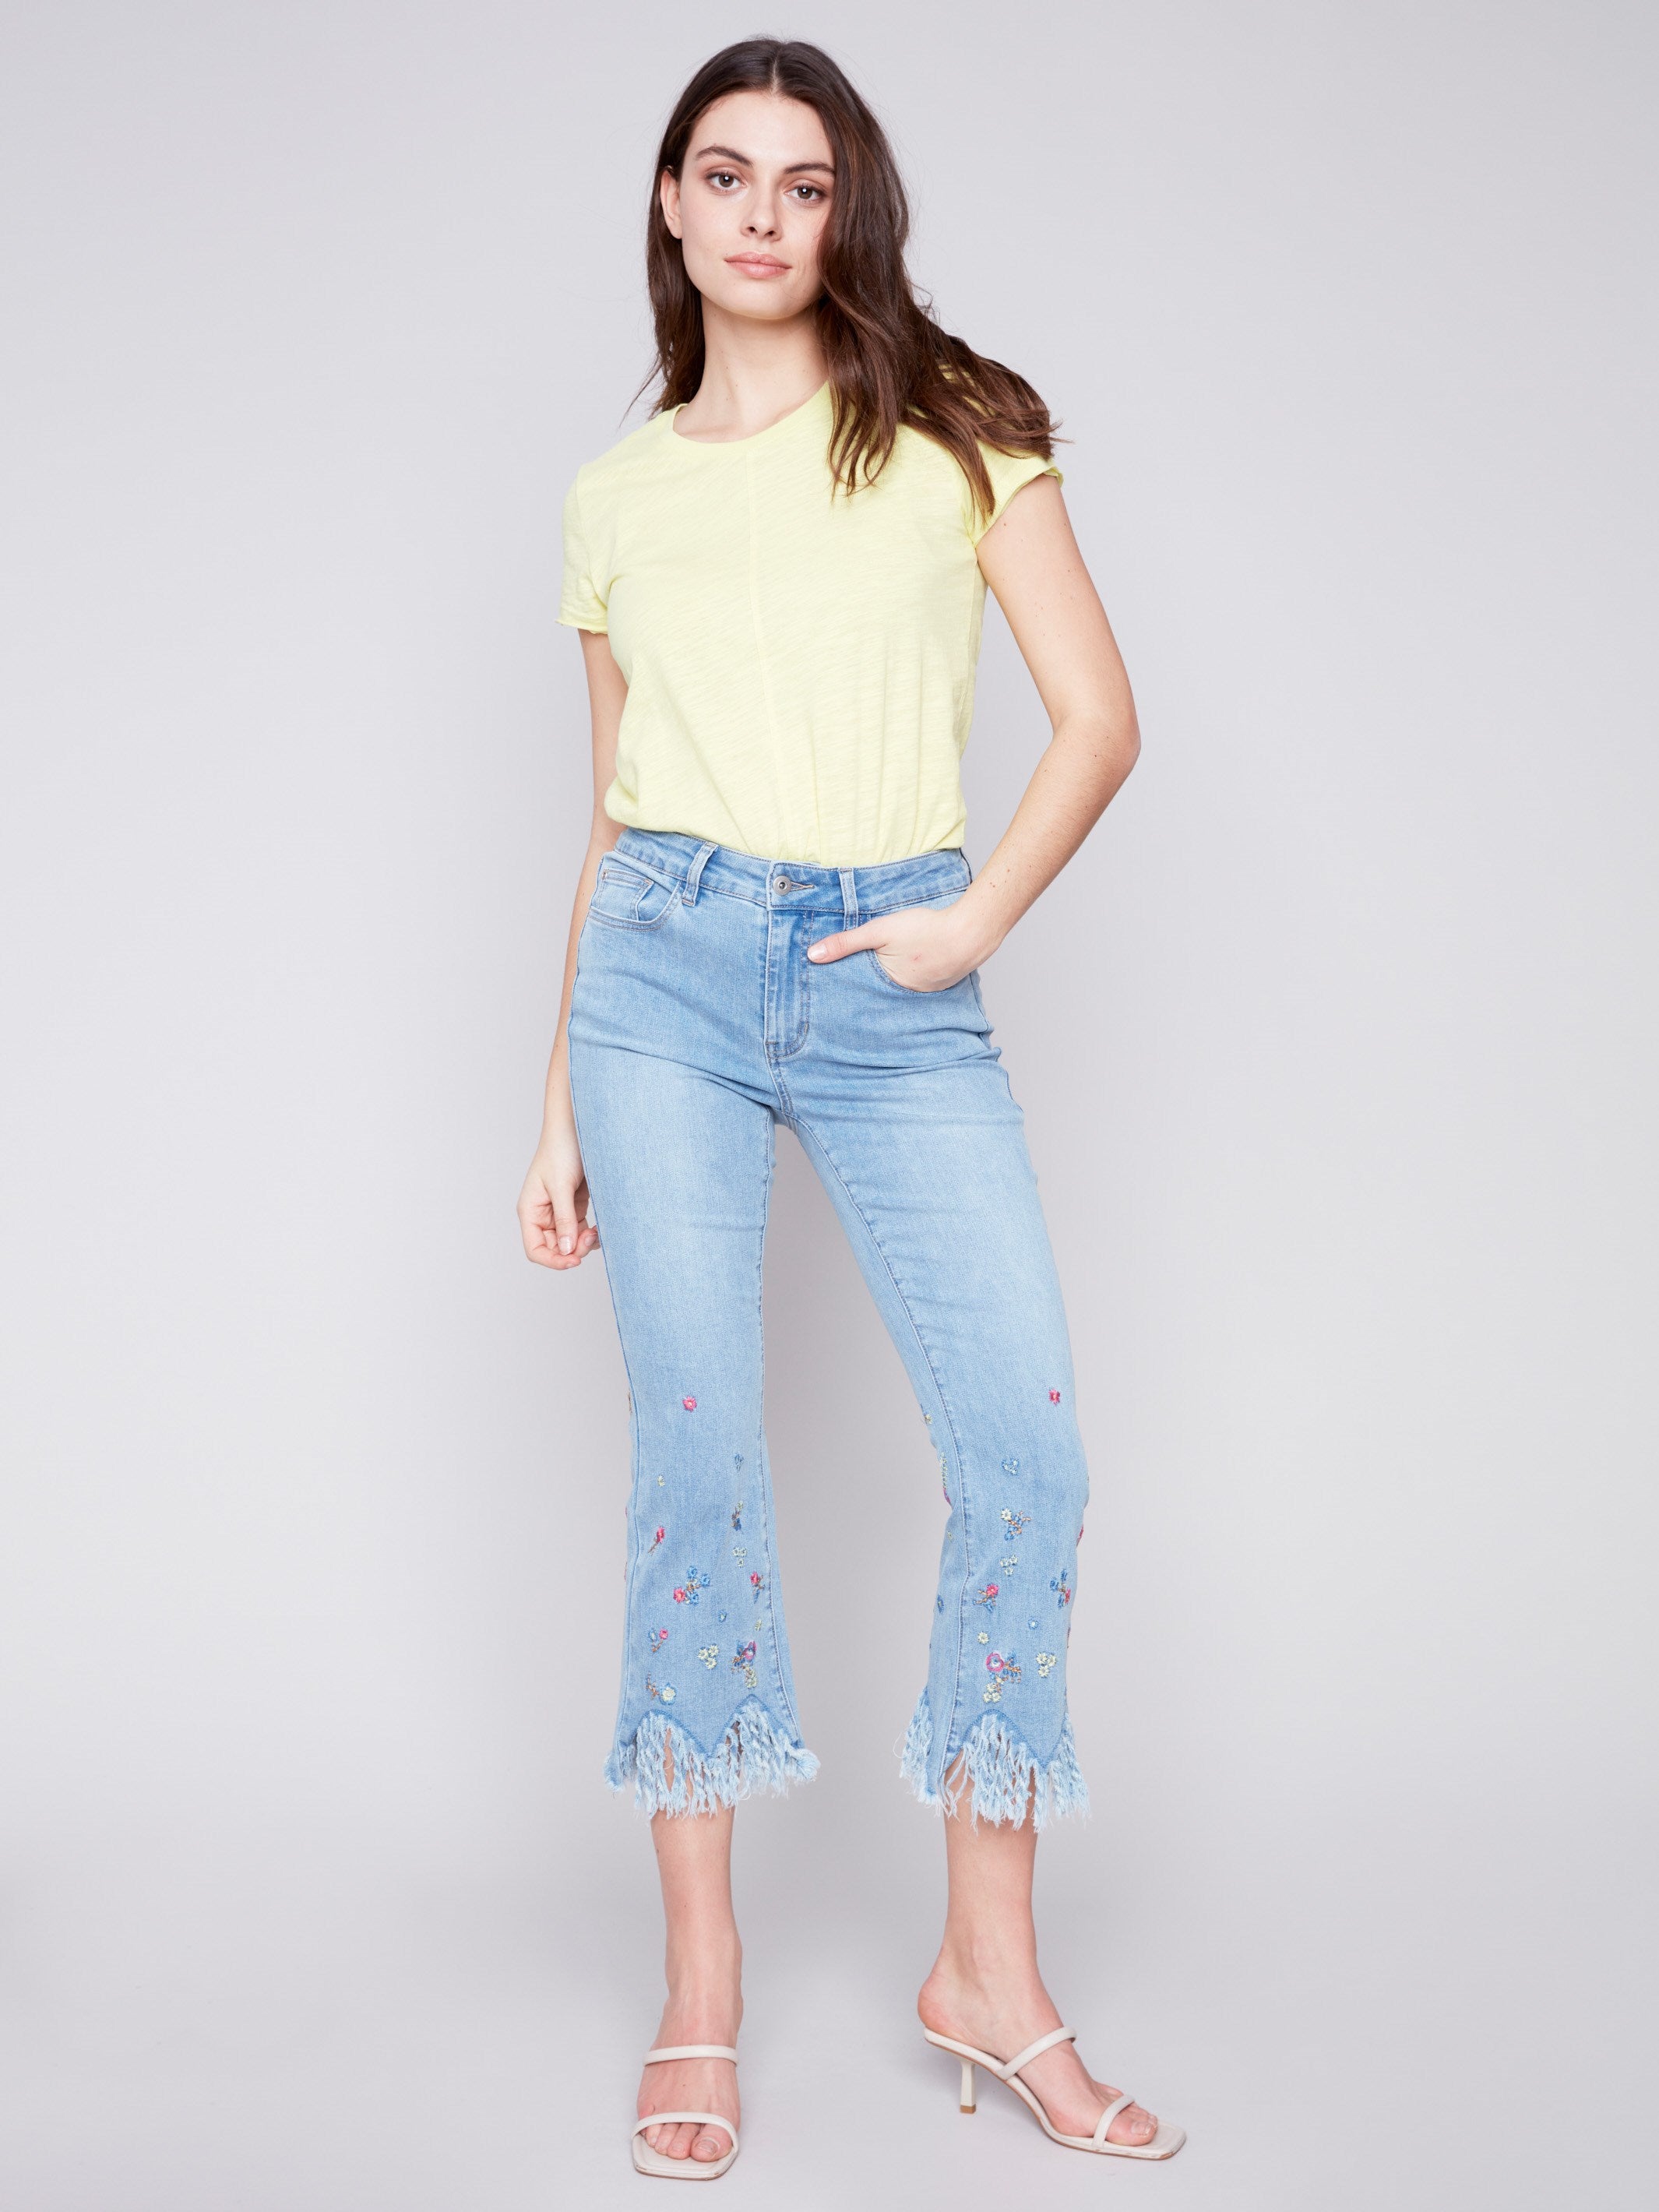 Cropped Jeans with Embroidered Fringed Hem - Light Blue - Charlie B Collection Canada - Image 1